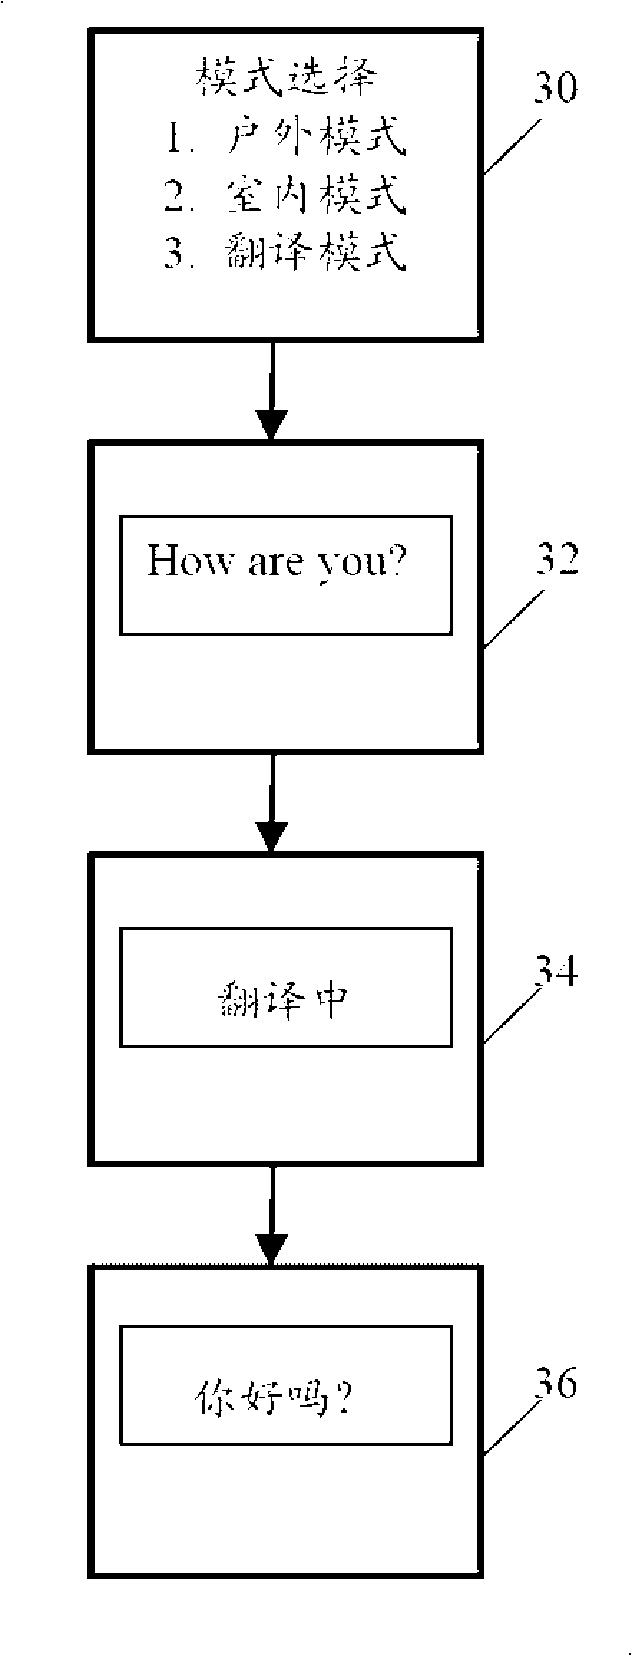 Apparatus and method for translating image and character